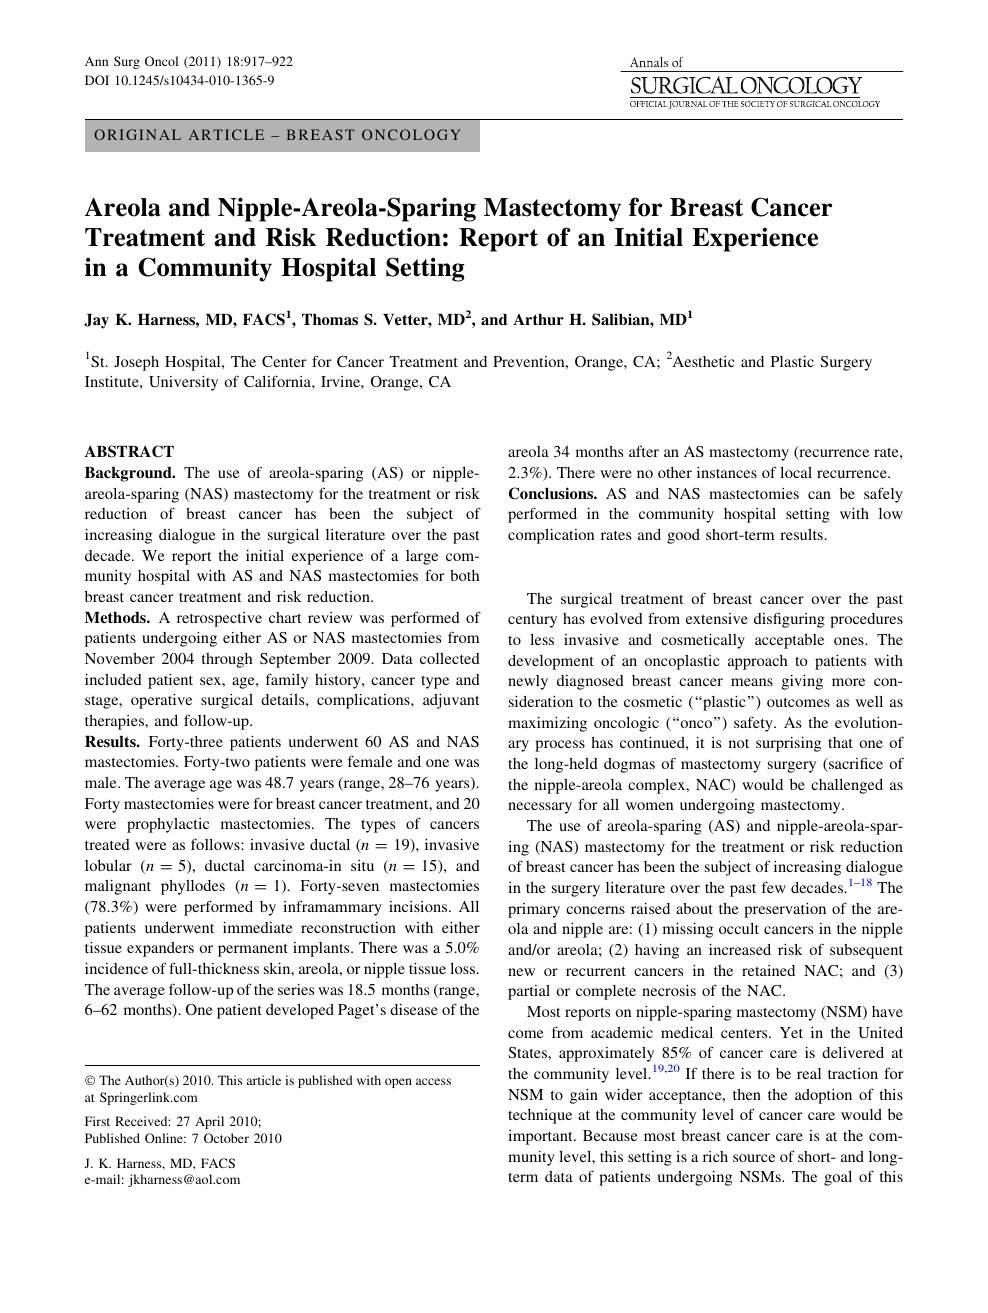 Areola and Nipple-Areola-Sparing Mastectomy for Breast Cancer Treatment and Risk Reduction Report of an Initial Experience in a Community Hospital Setting picture